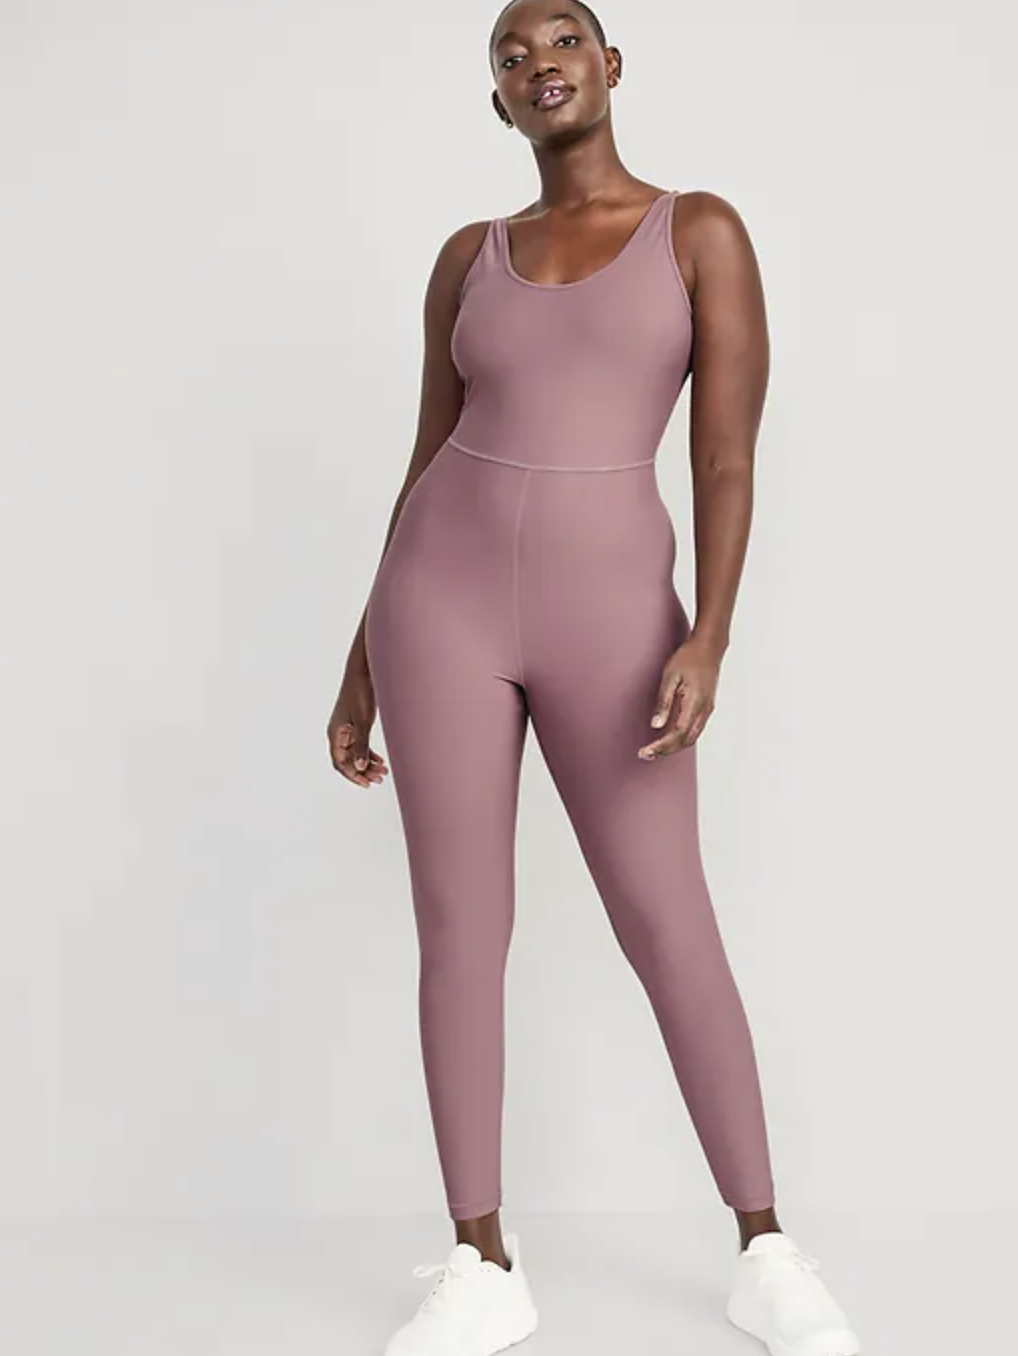 a person wearing the bodysuit in front of a plain background